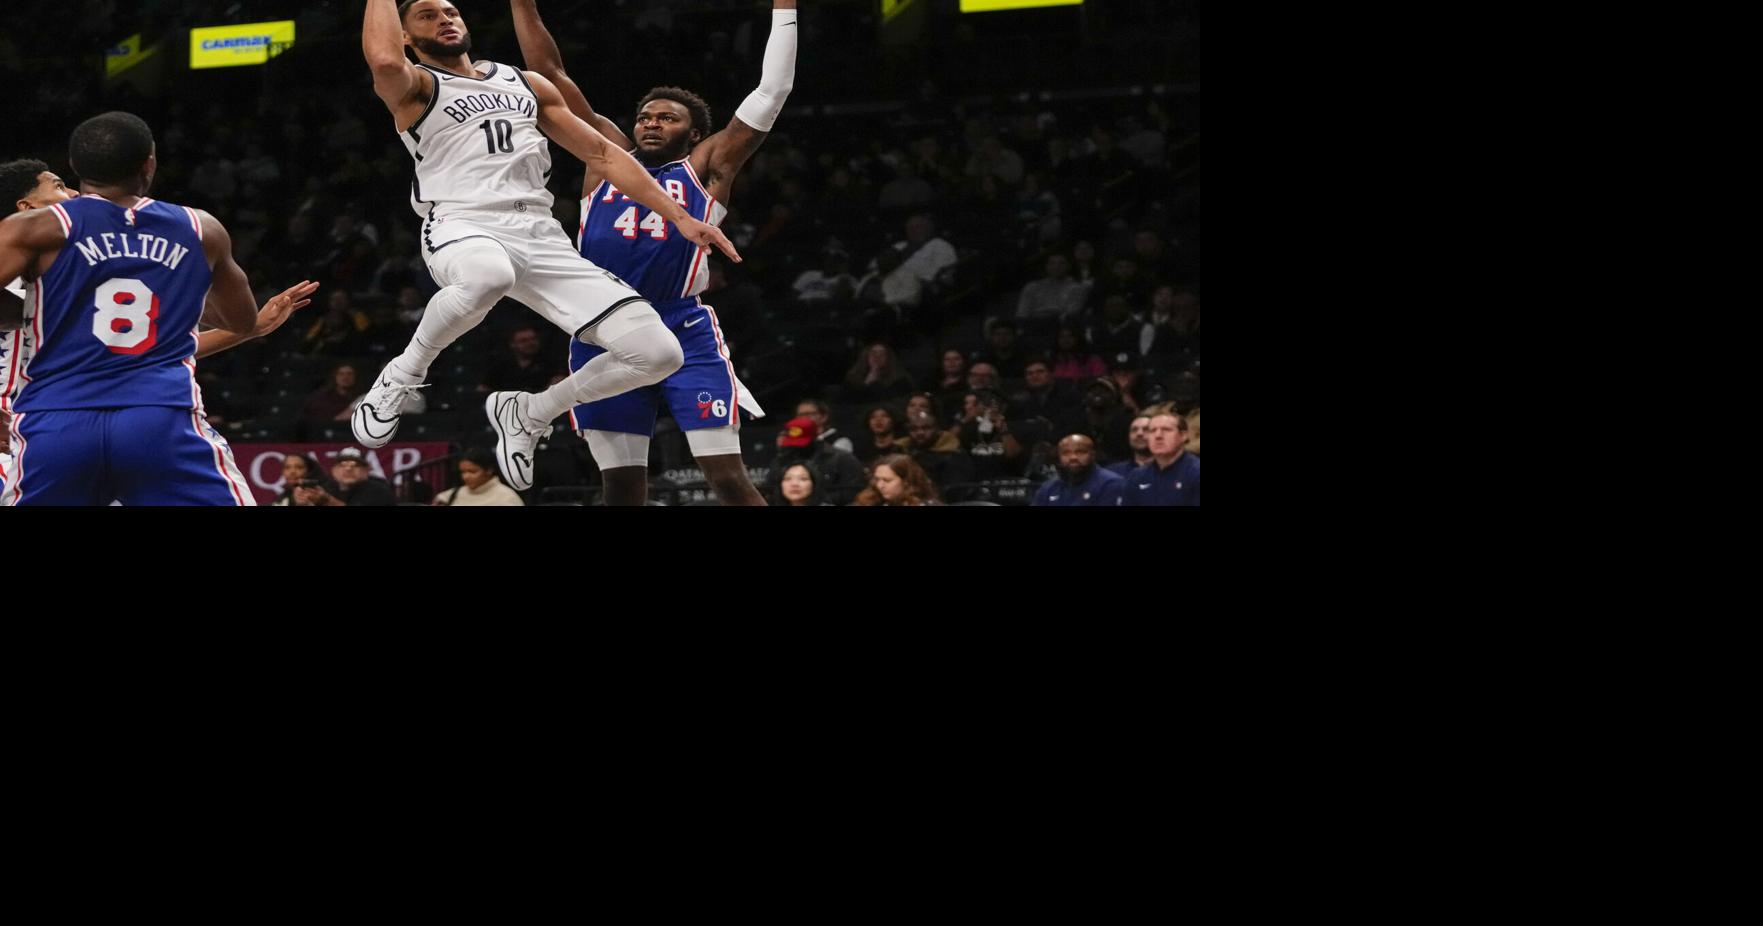 Brooklyn Nets need healthy Simmons to bounce back